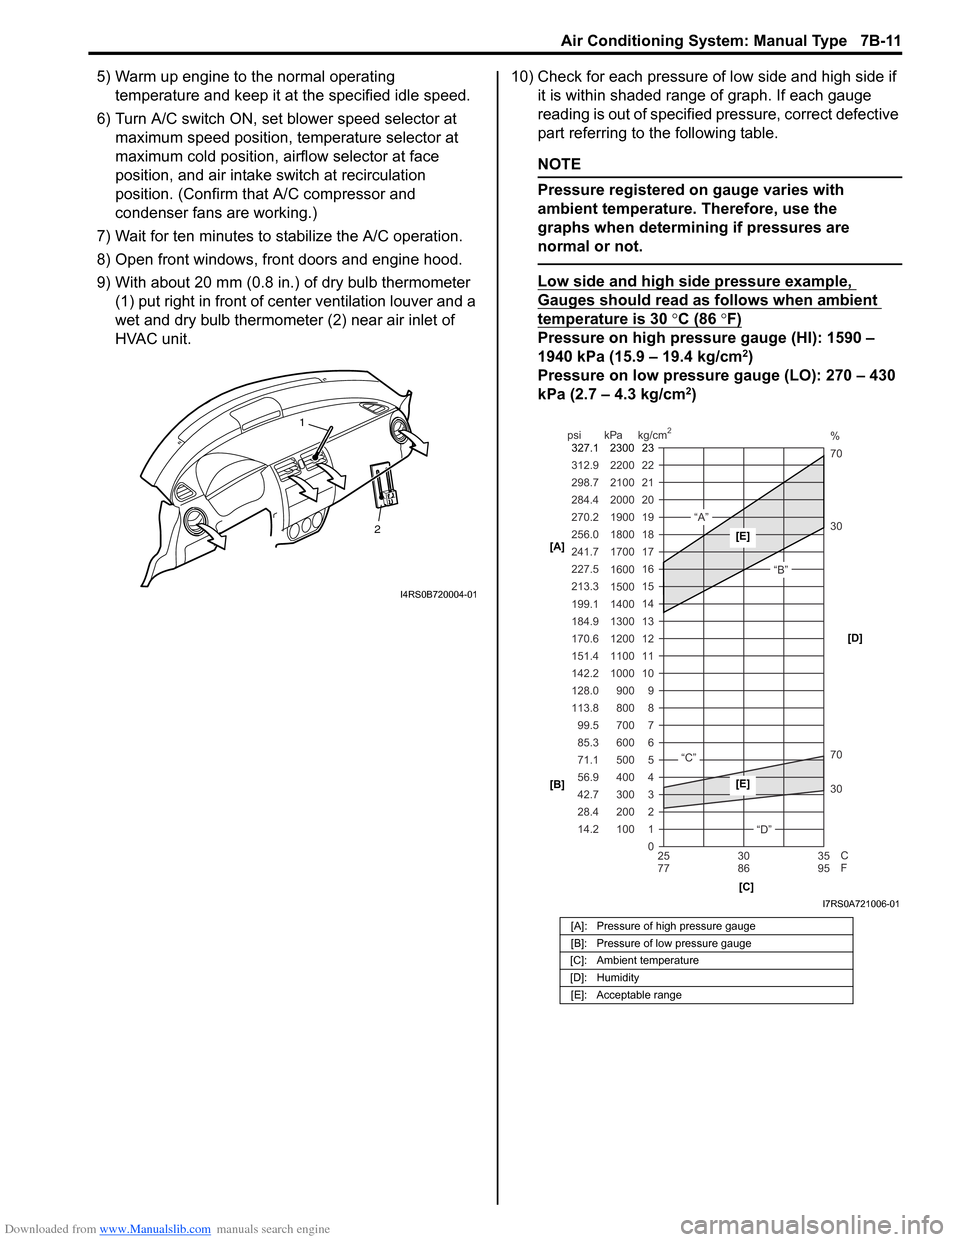 SUZUKI SWIFT 2007 2.G Service Workshop Manual Downloaded from www.Manualslib.com manuals search engine Air Conditioning System: Manual Type 7B-11
5) Warm up engine to the normal operating temperature and keep it at the specified idle speed.
6) Tu